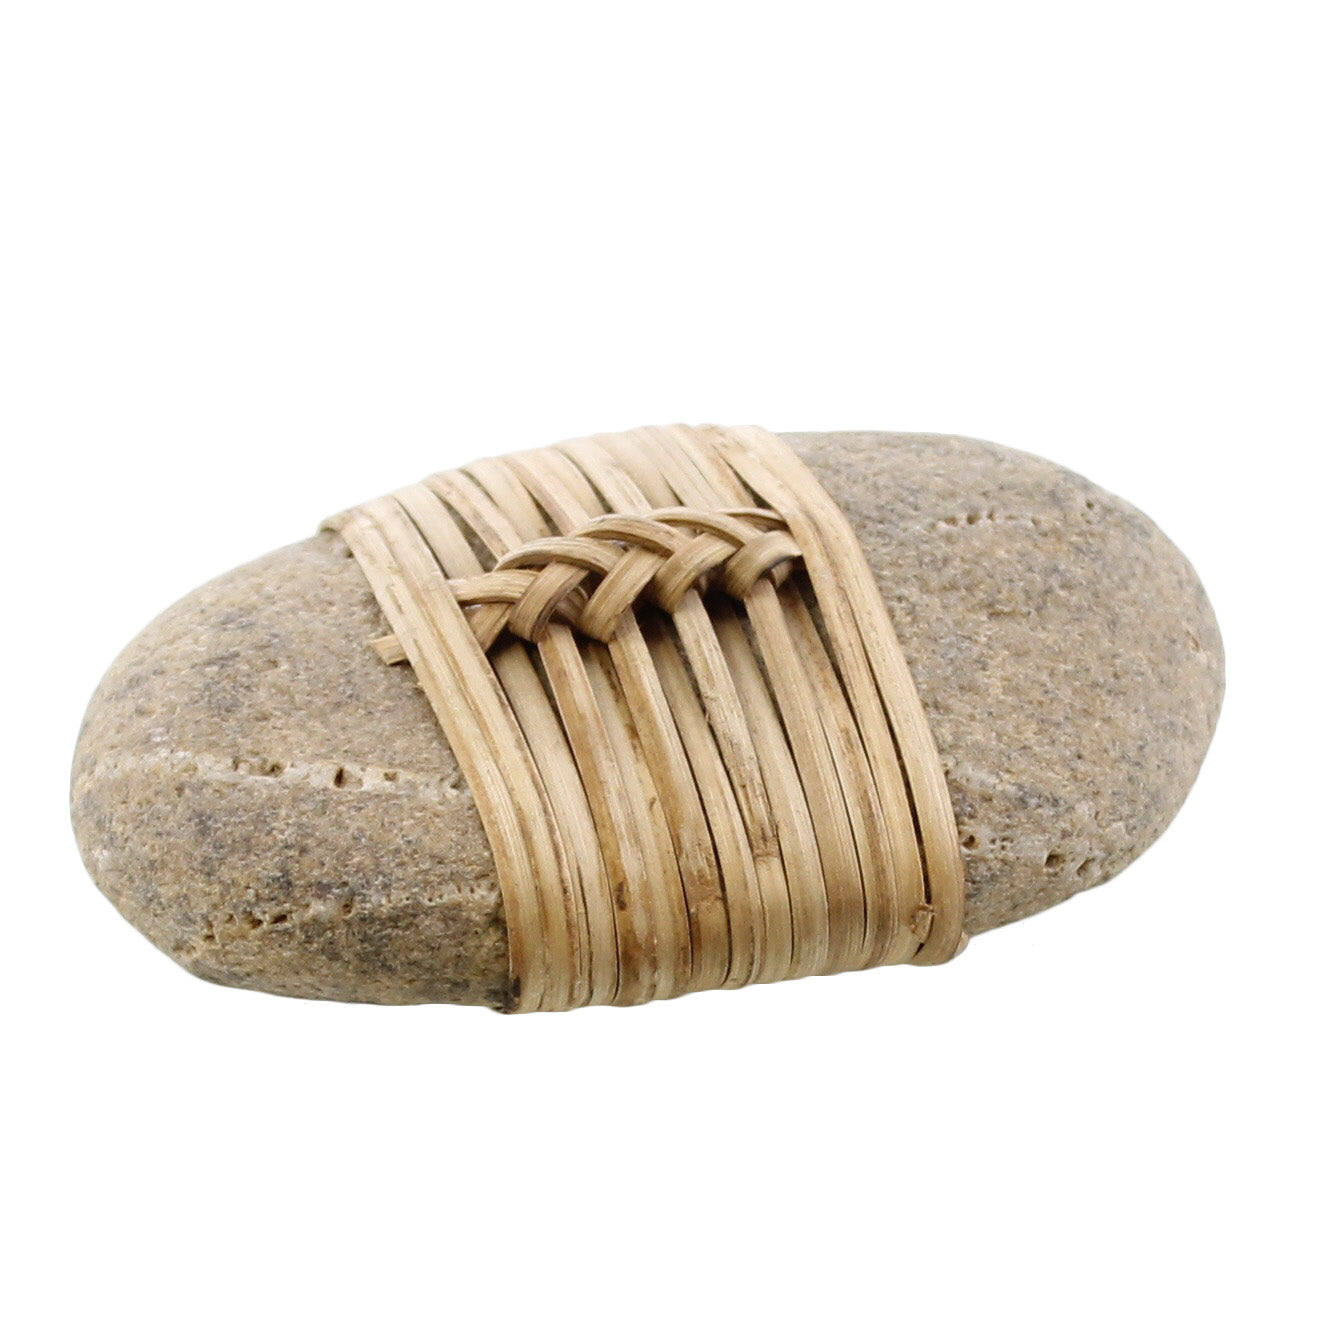 Zen Stone Wrapped In Bamboo